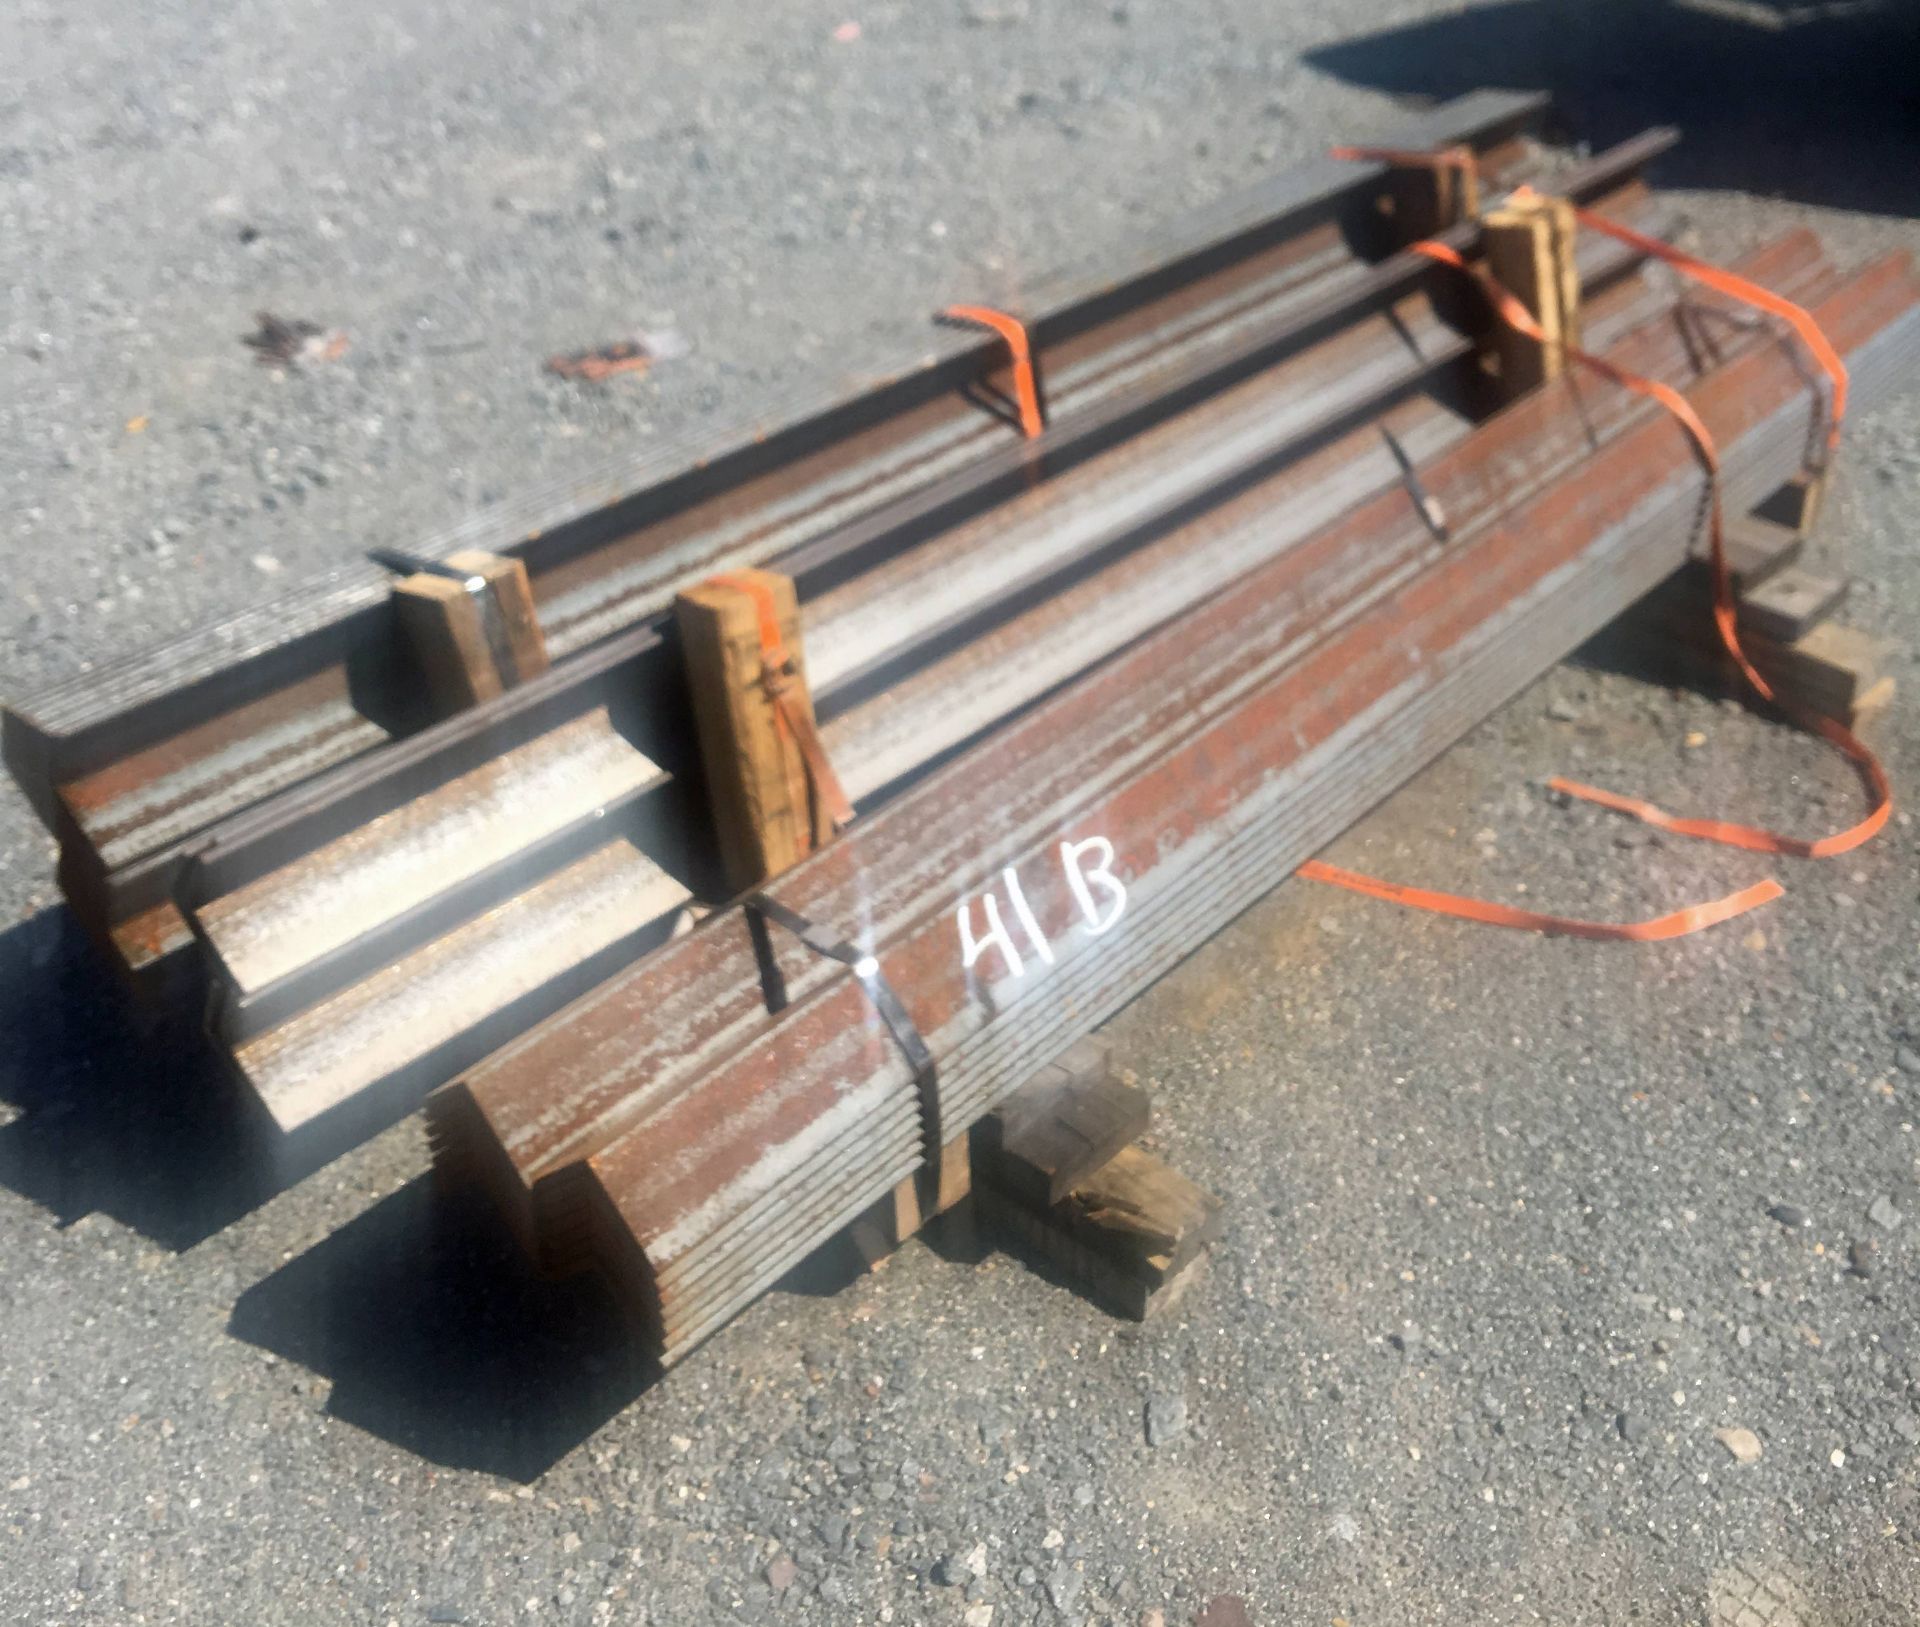 Pallet of Angle Iron